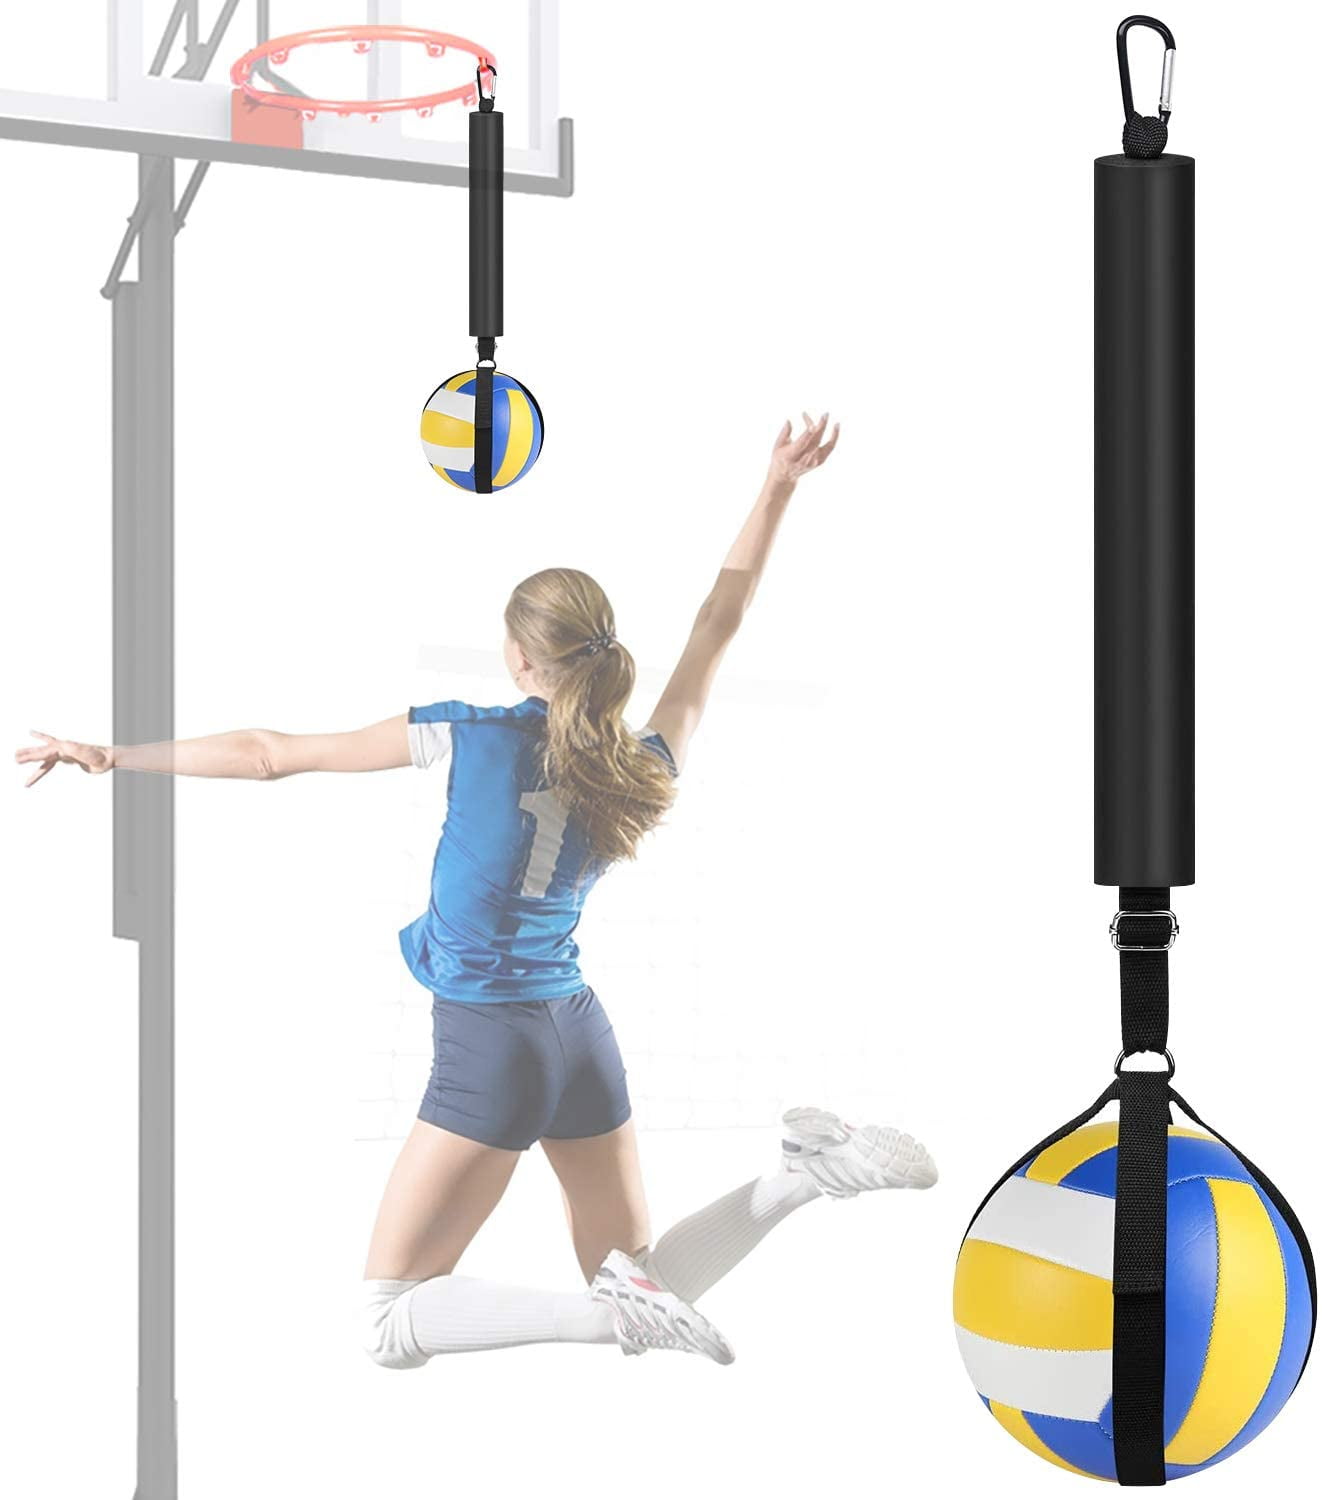 Volleyball Spike Trainer, Volleyball Spike Training System for Basketball Hoop, Volleyball Equipment Training Aid Improves Serving, Jumping, Arm Swing Mechanics and Spiking Power